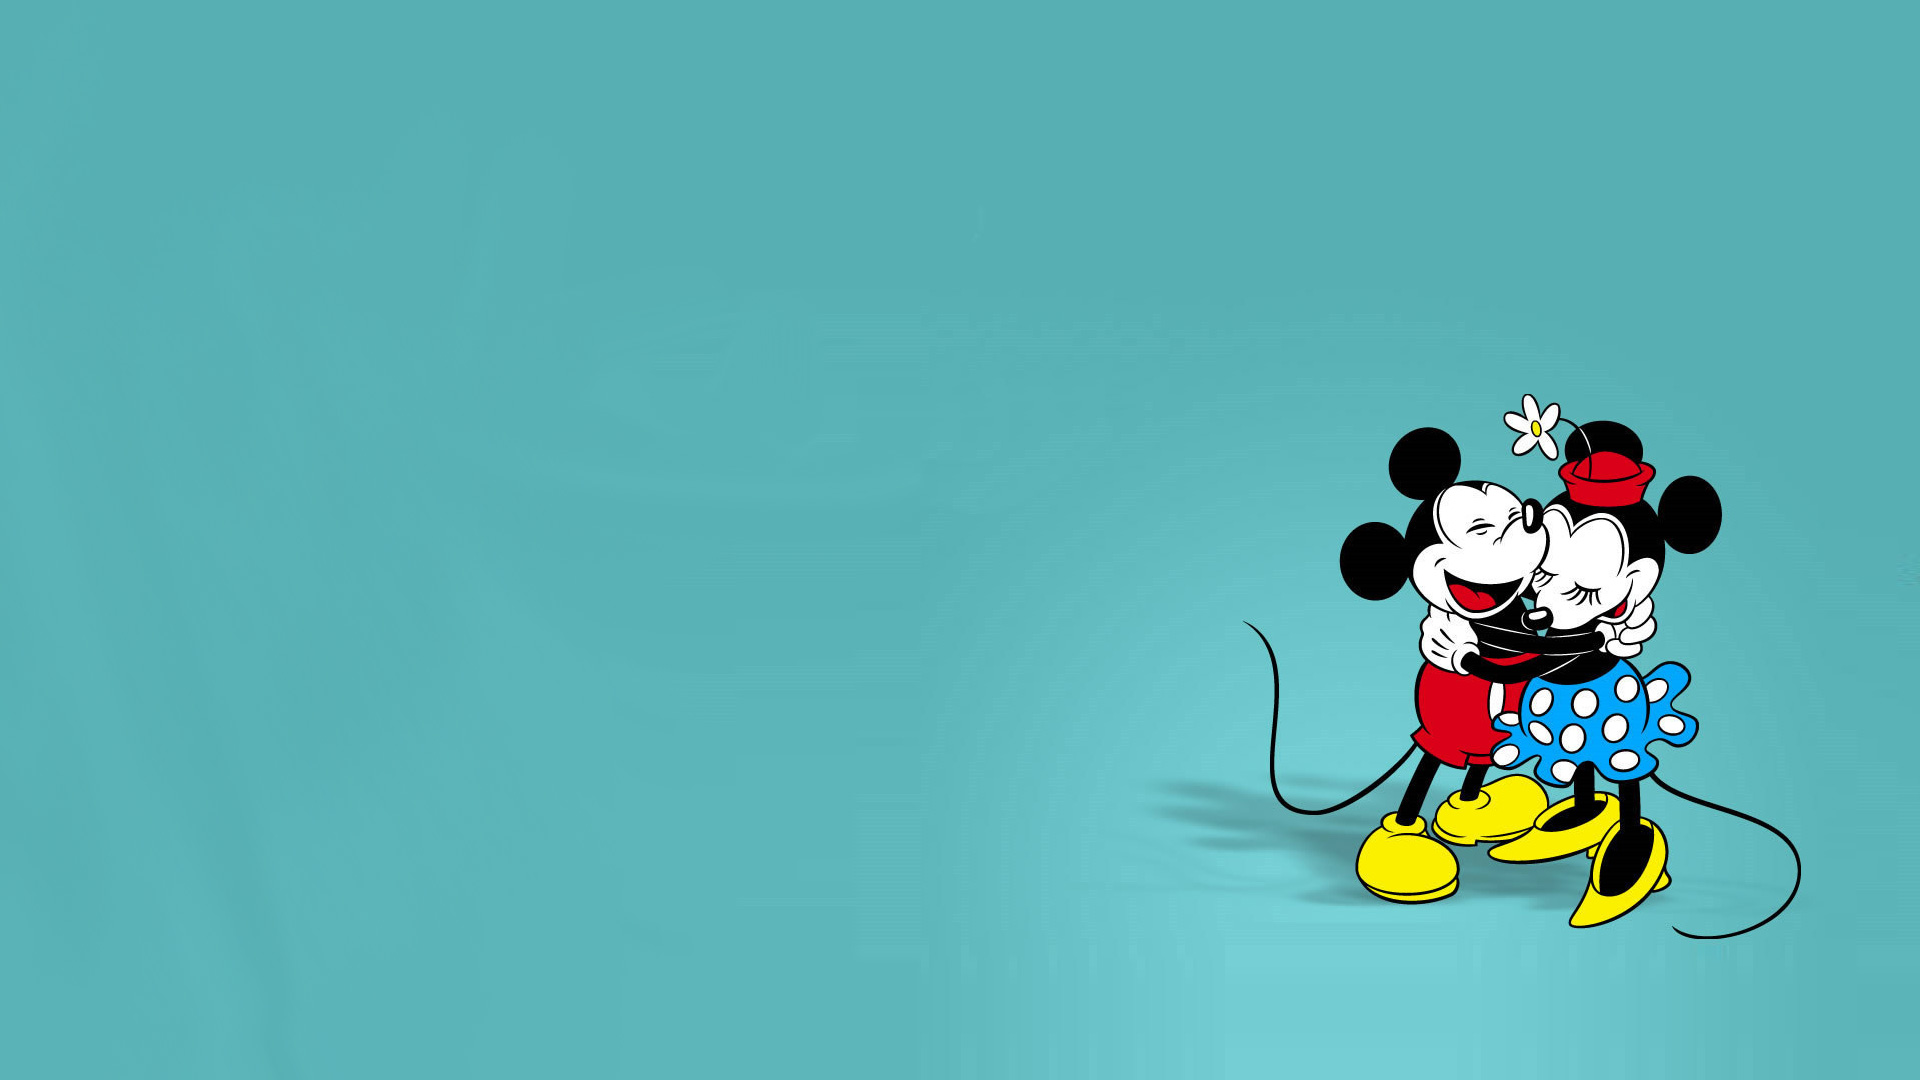 X Minnie Mouse Wallpaper Image And Choose Set As Background